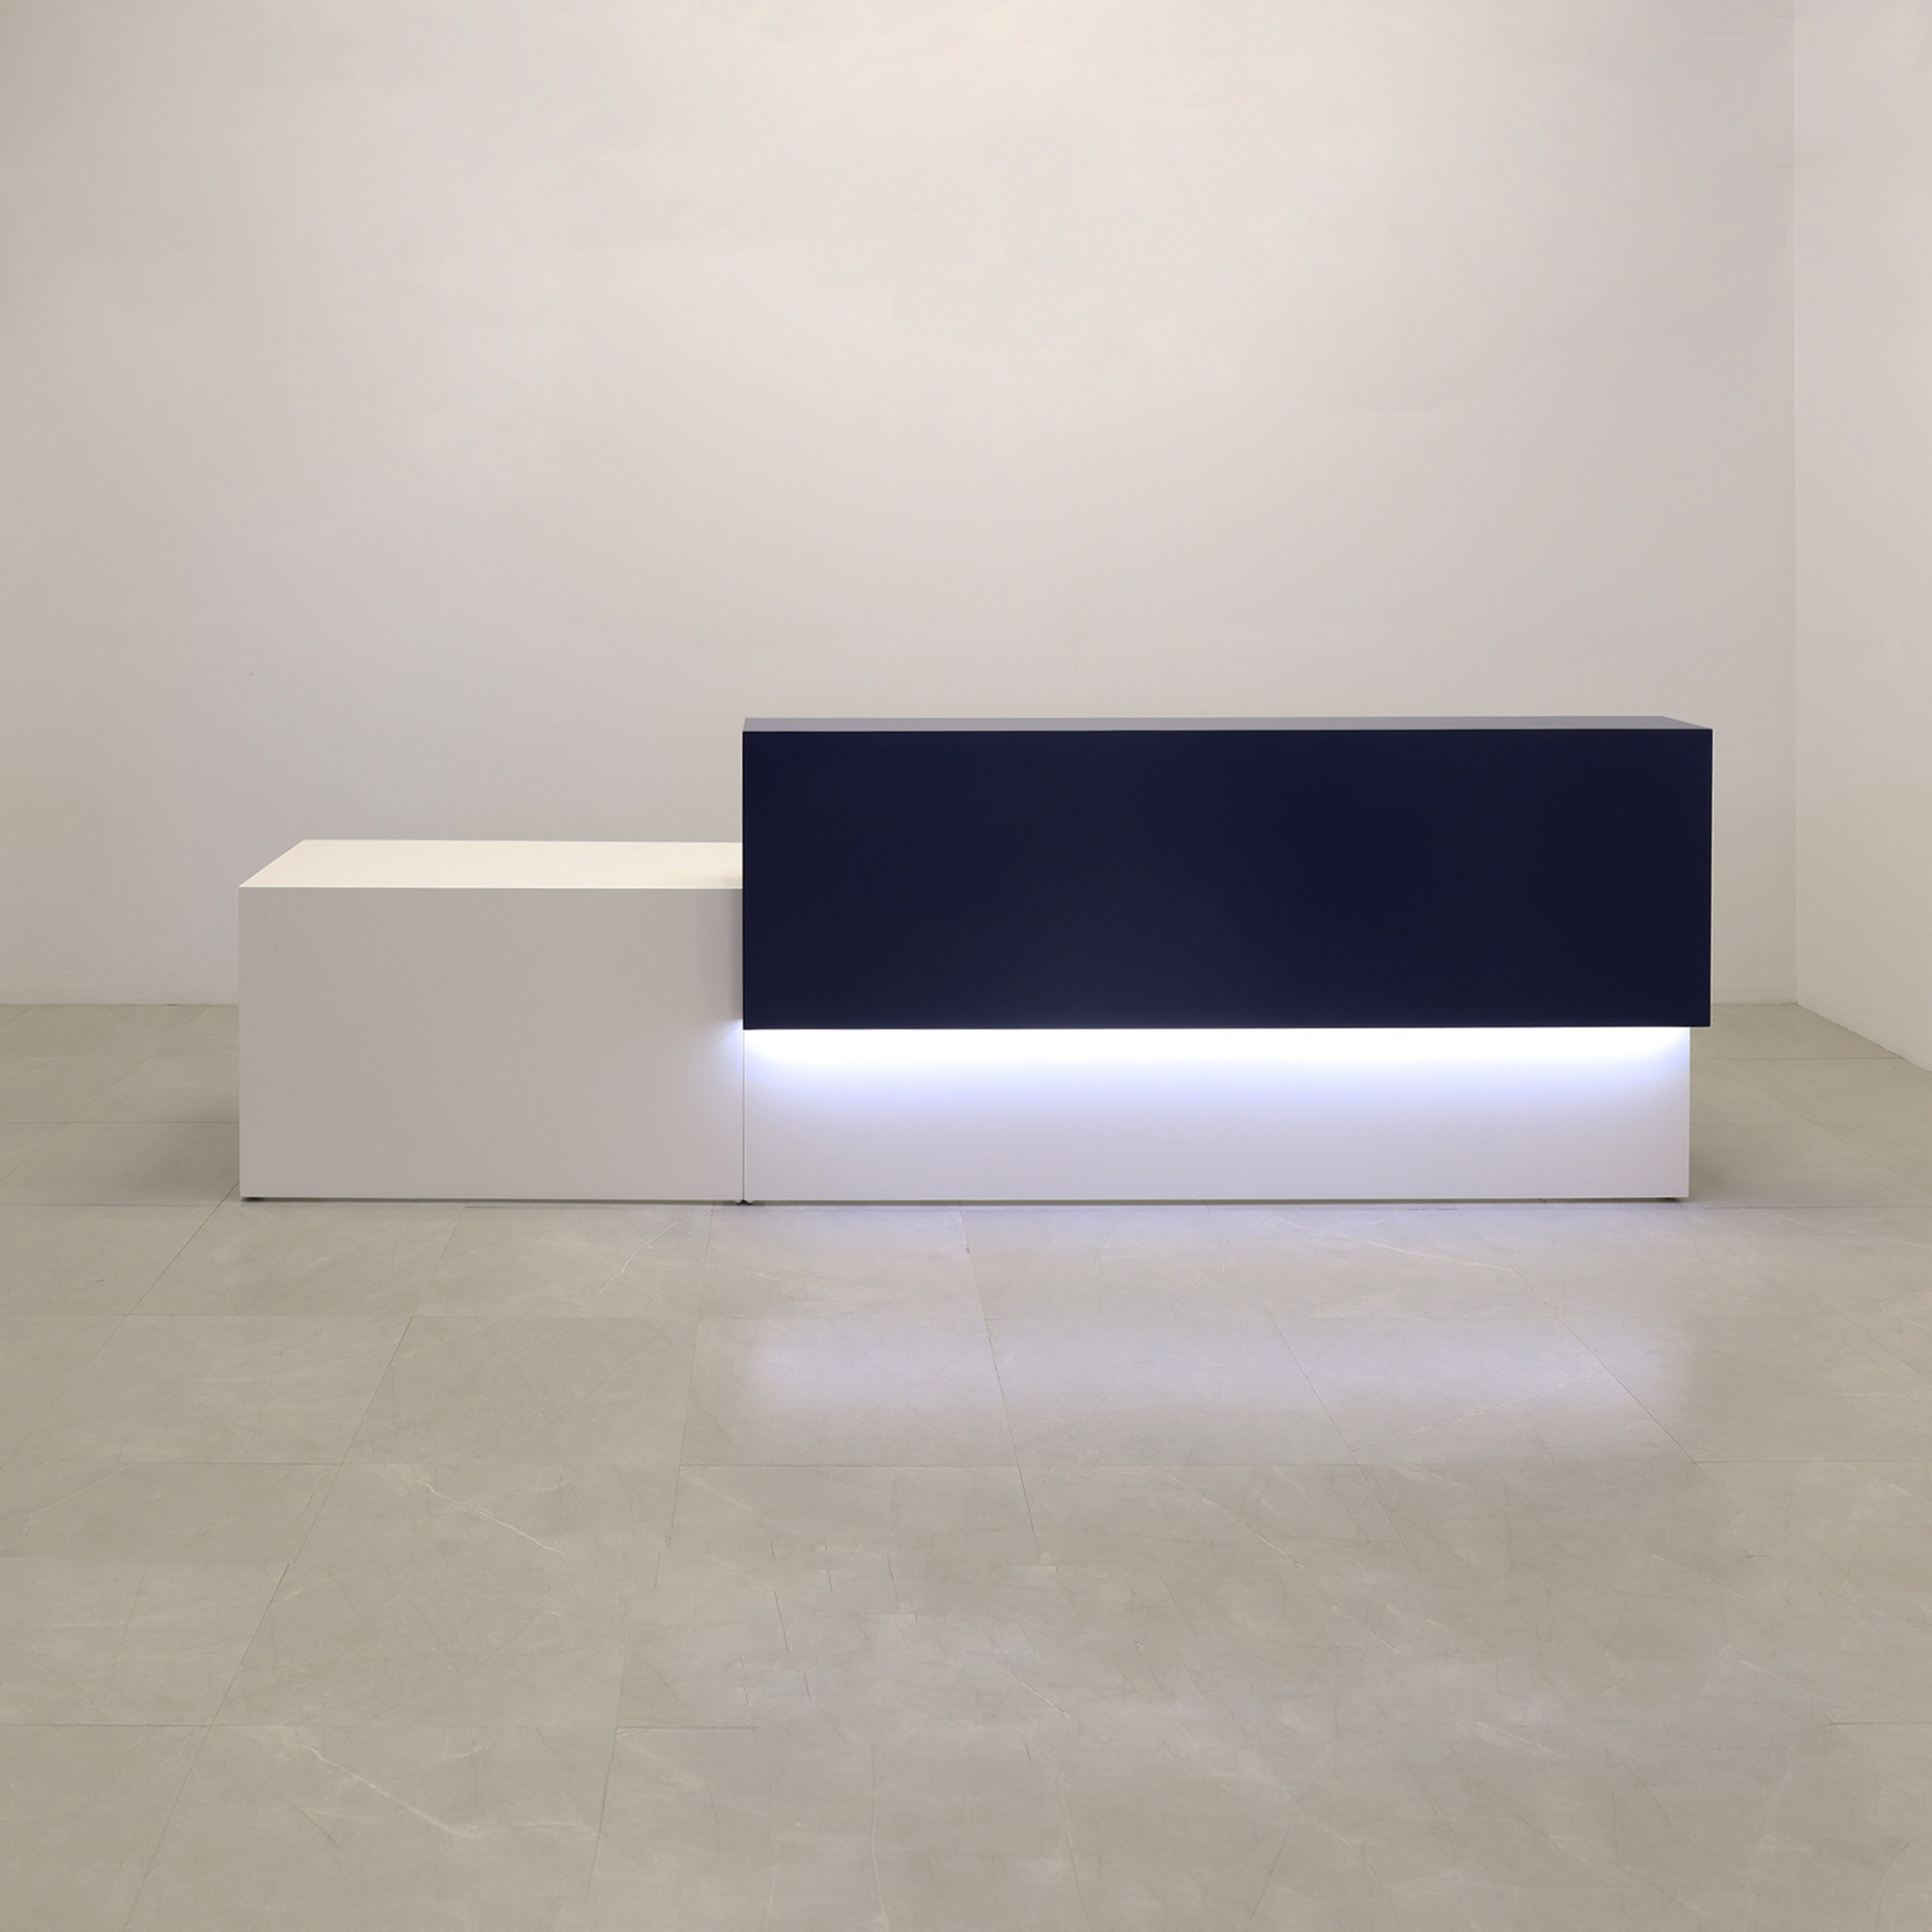 Los Angeles Long and ADA Compliant Custom Reception Desk in navy blue matte laminate counter and dover-off white laminate desk, with warm white LED shown here.